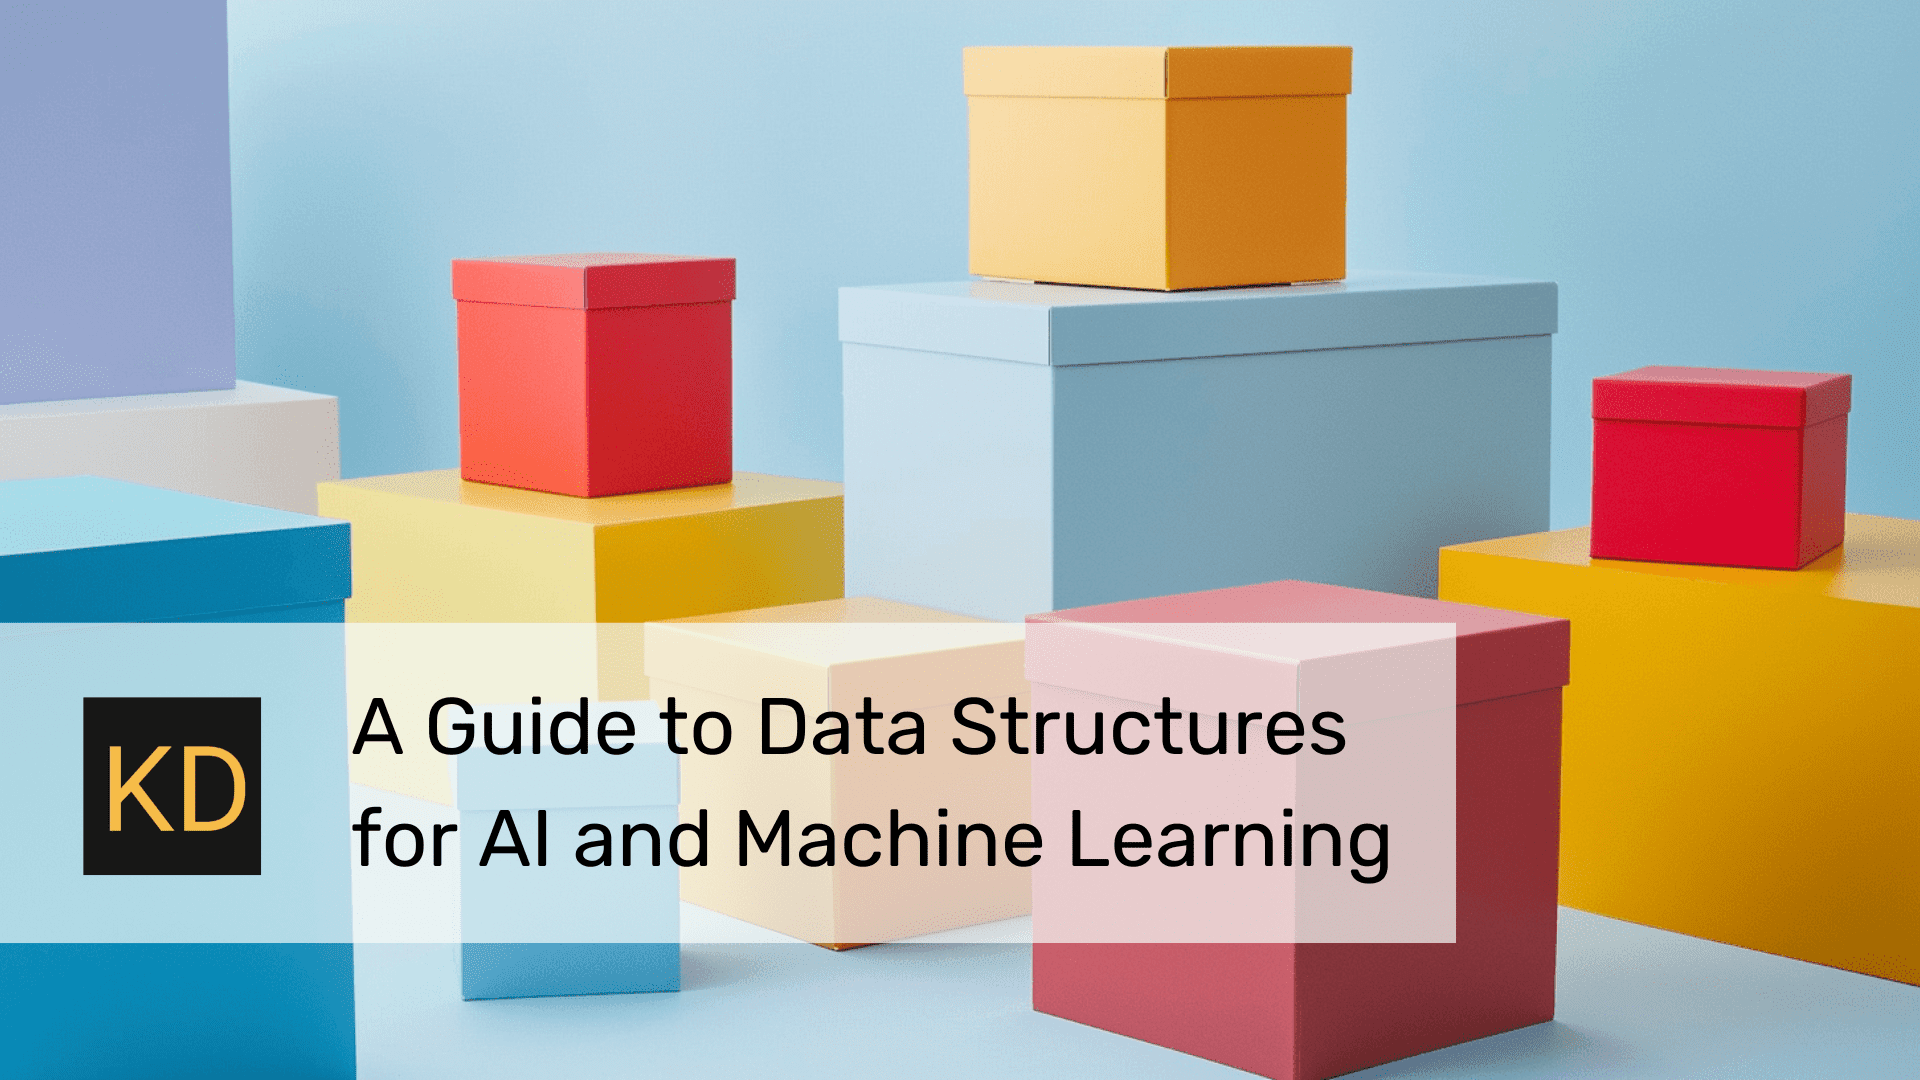 A Guide to Data Structures for AI and Machine Learning